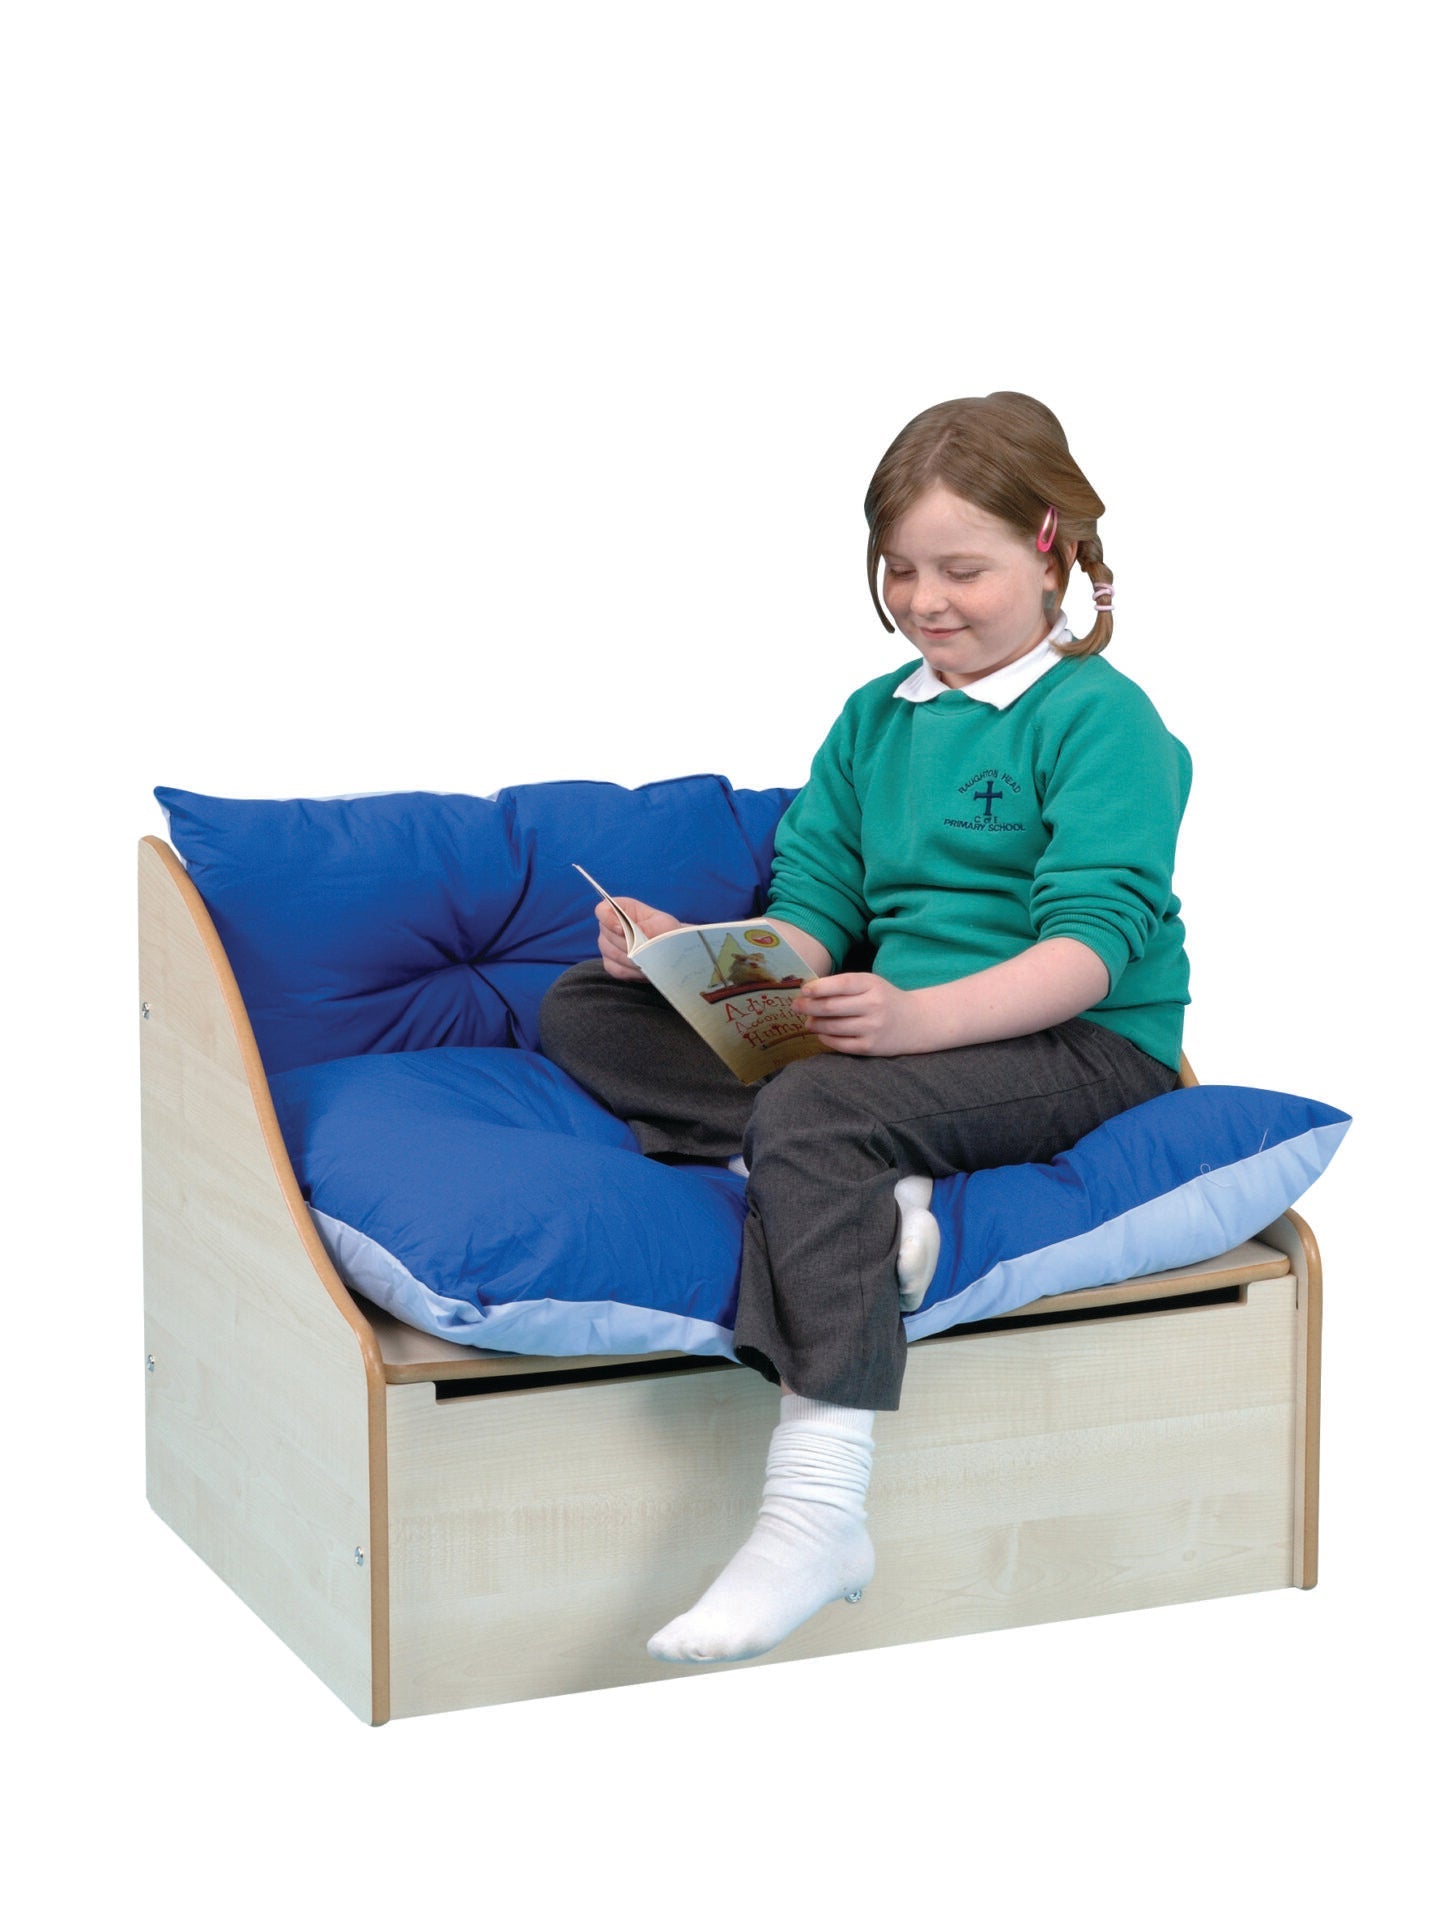 Junior Reading Corner Sofa with Blue Cushion, The Junior Reading Corner Sofa with Blue Cushion is a durable high-quality unit to meet the heavy demands of the classroom or nursery. The Junior Reading Corner Sofa with Blue Cushion is designed to create a cosy and safe reading environment which can be easily accessed. Junior Reading Corner Sofa with Blue Cushion 15mm Covered MDF – ISO 22196 certified antibacterial. Comes with a comfy washable cushion. Encourages group and independent learning., Junior Reading